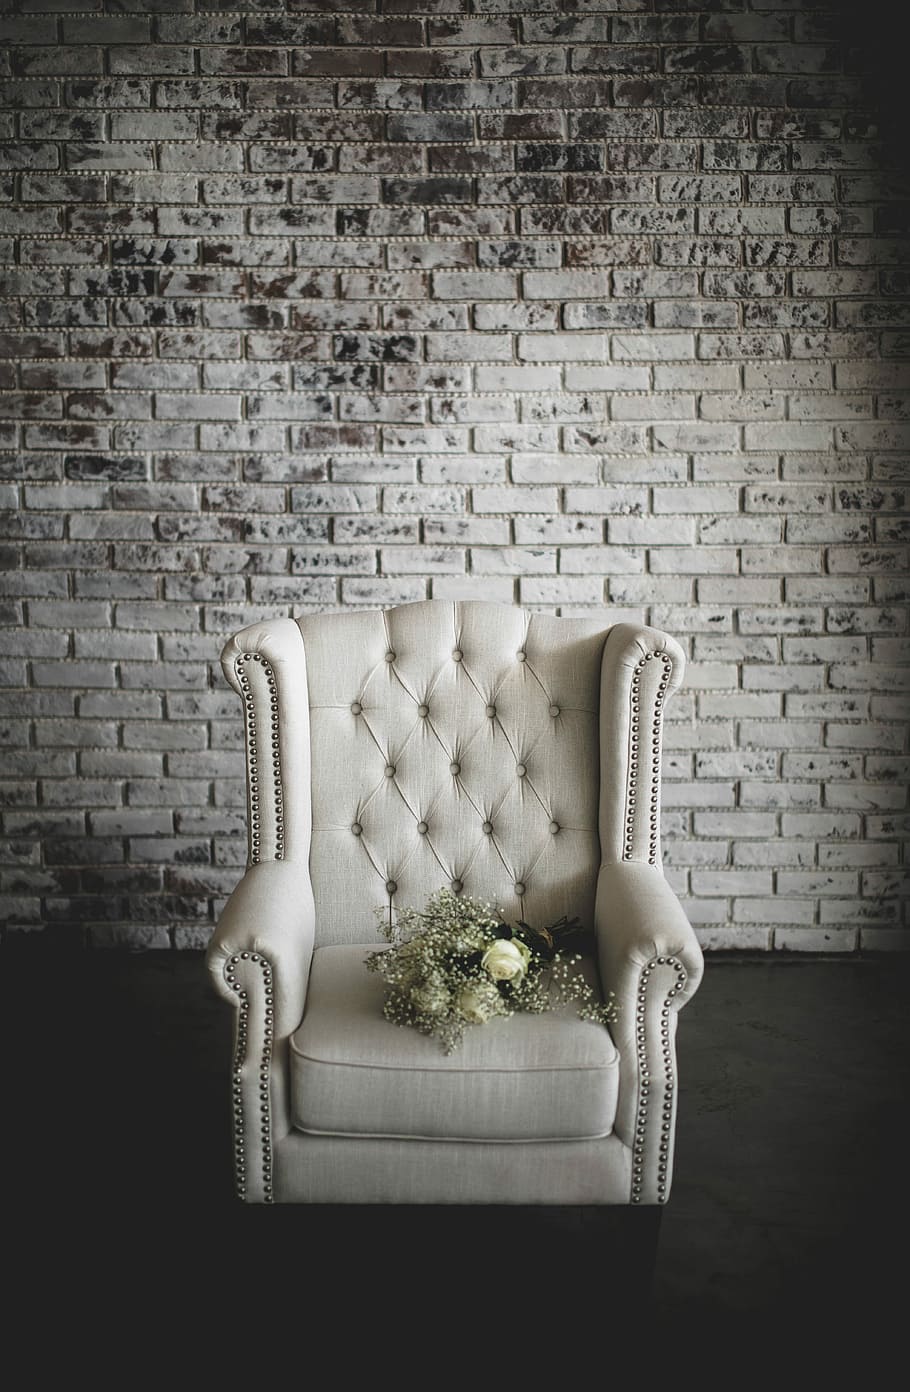 white flowers on top of white armchair, red rose flower bouquet on tufted white fabric armchair in front of gray concrete brick wall